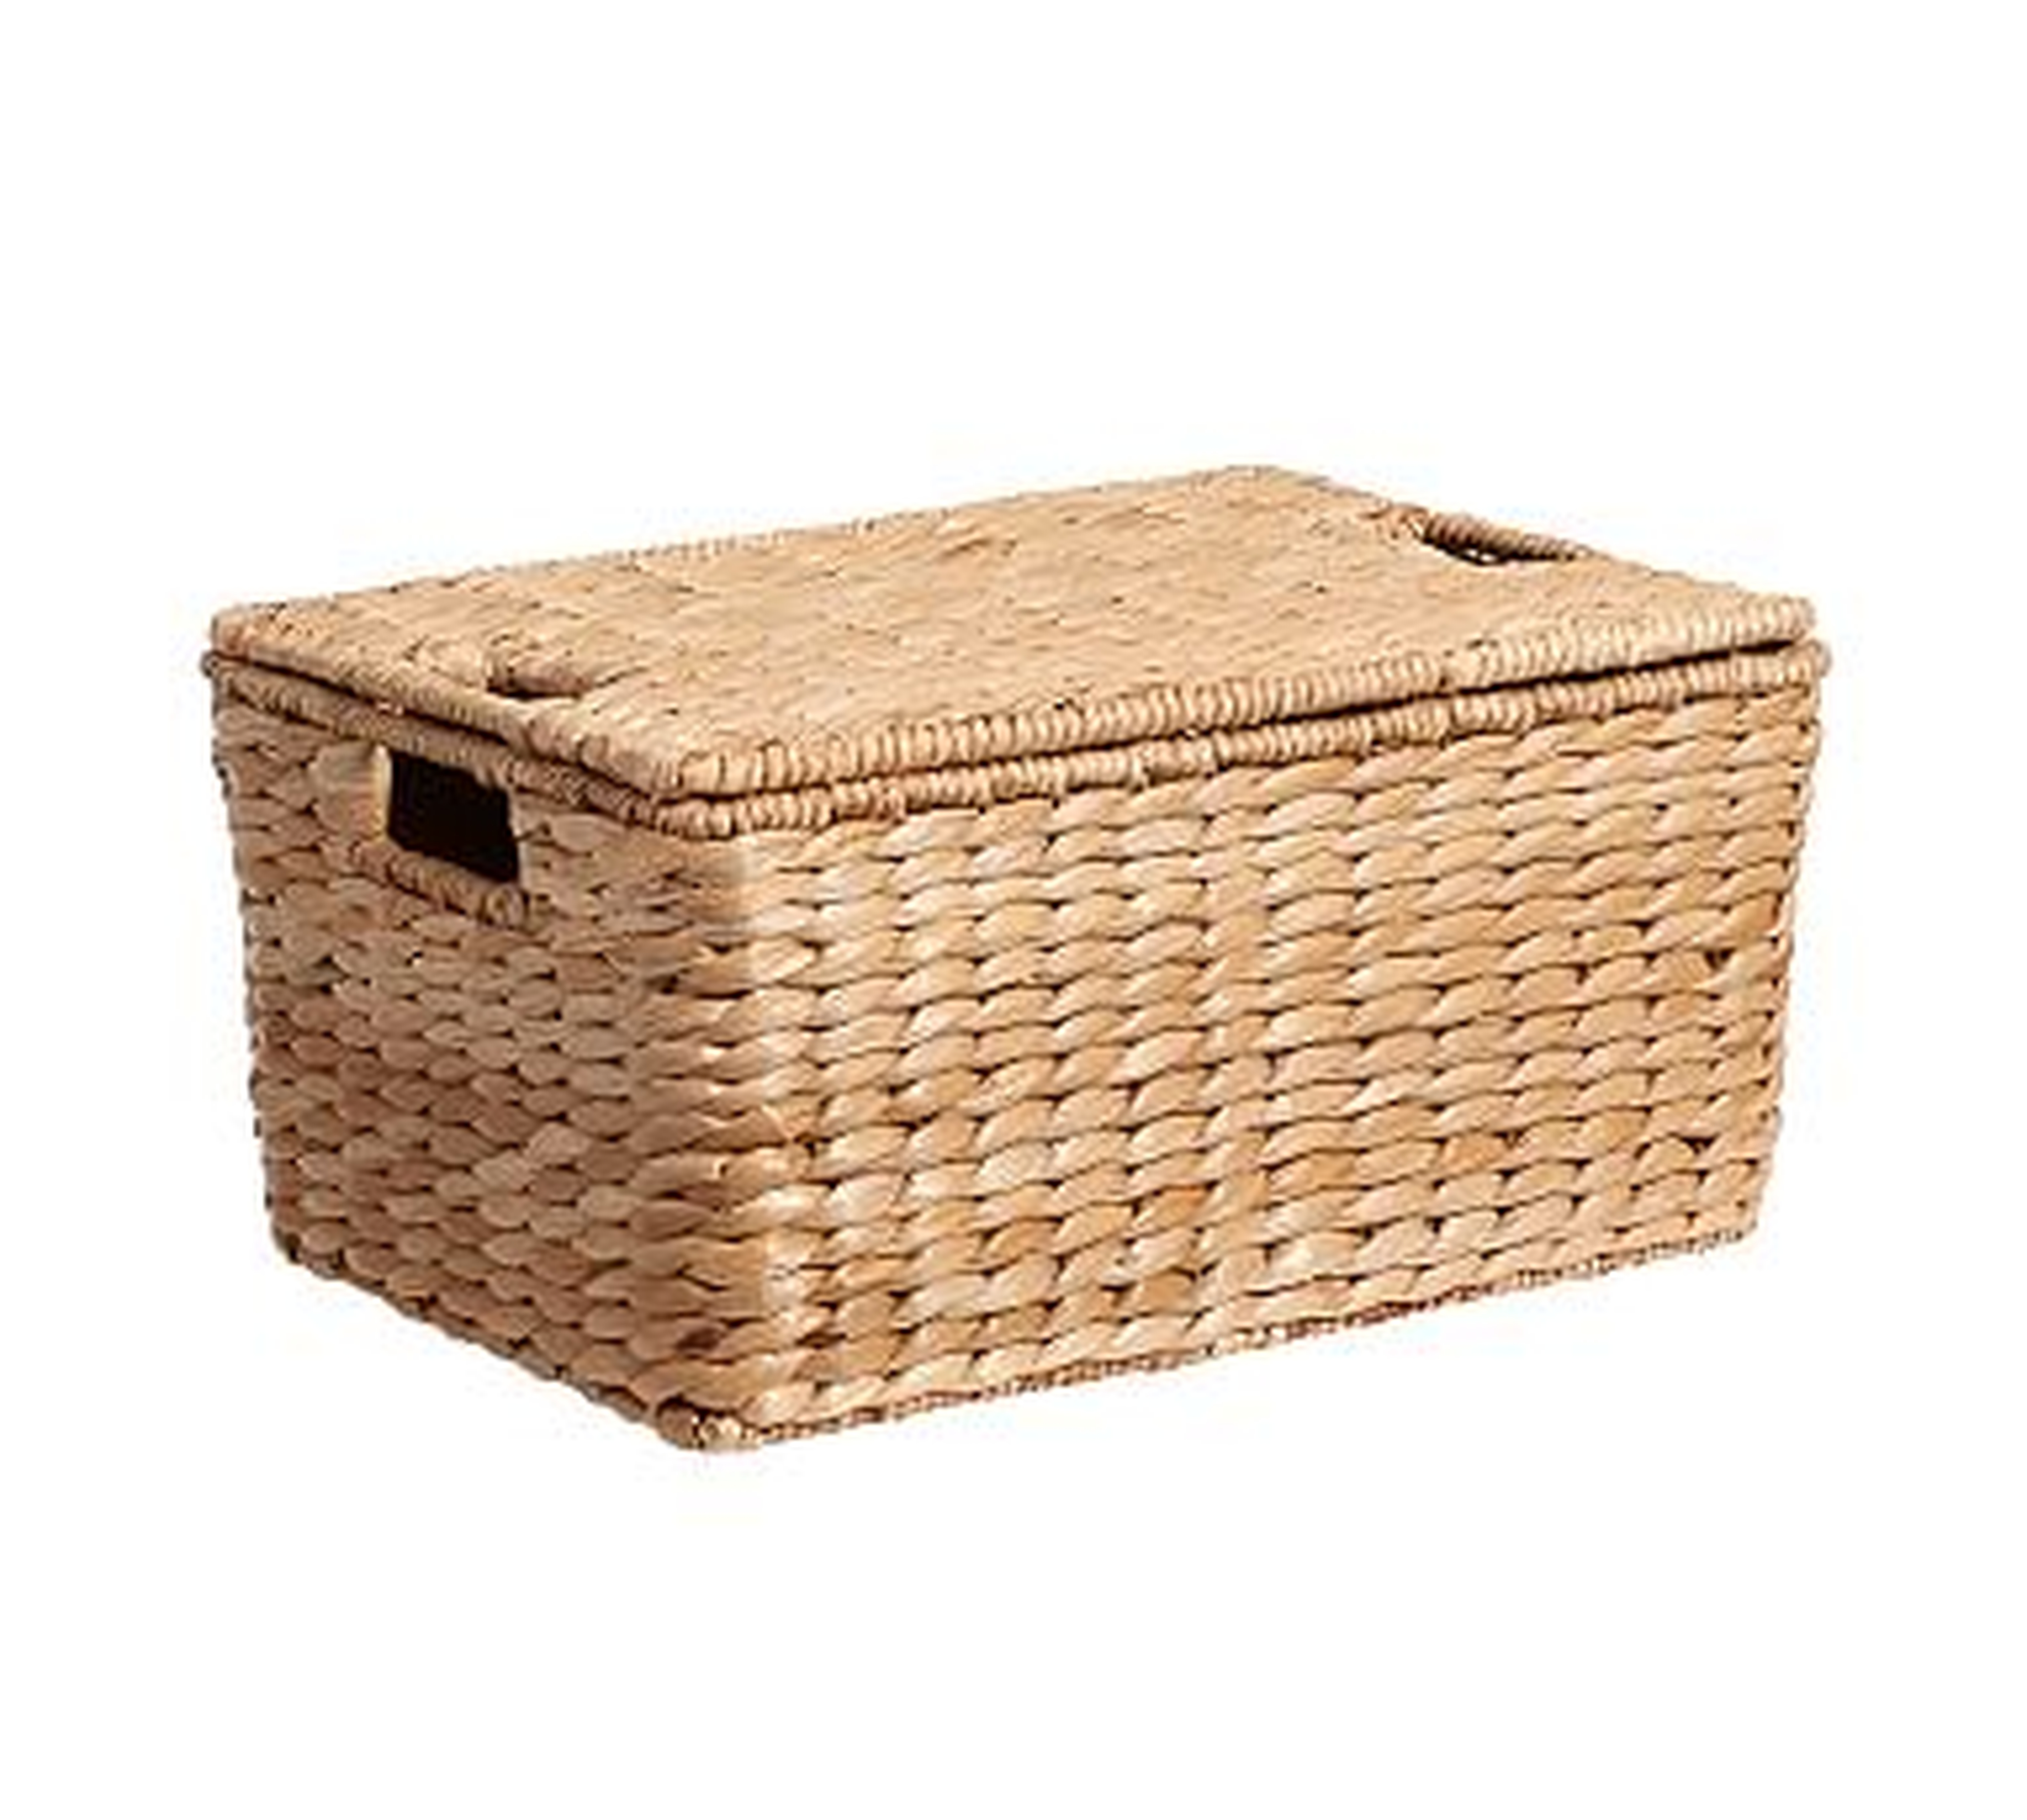 Savannah Handwoven Seagrass Basket - Baskets with Lids - Pottery Barn